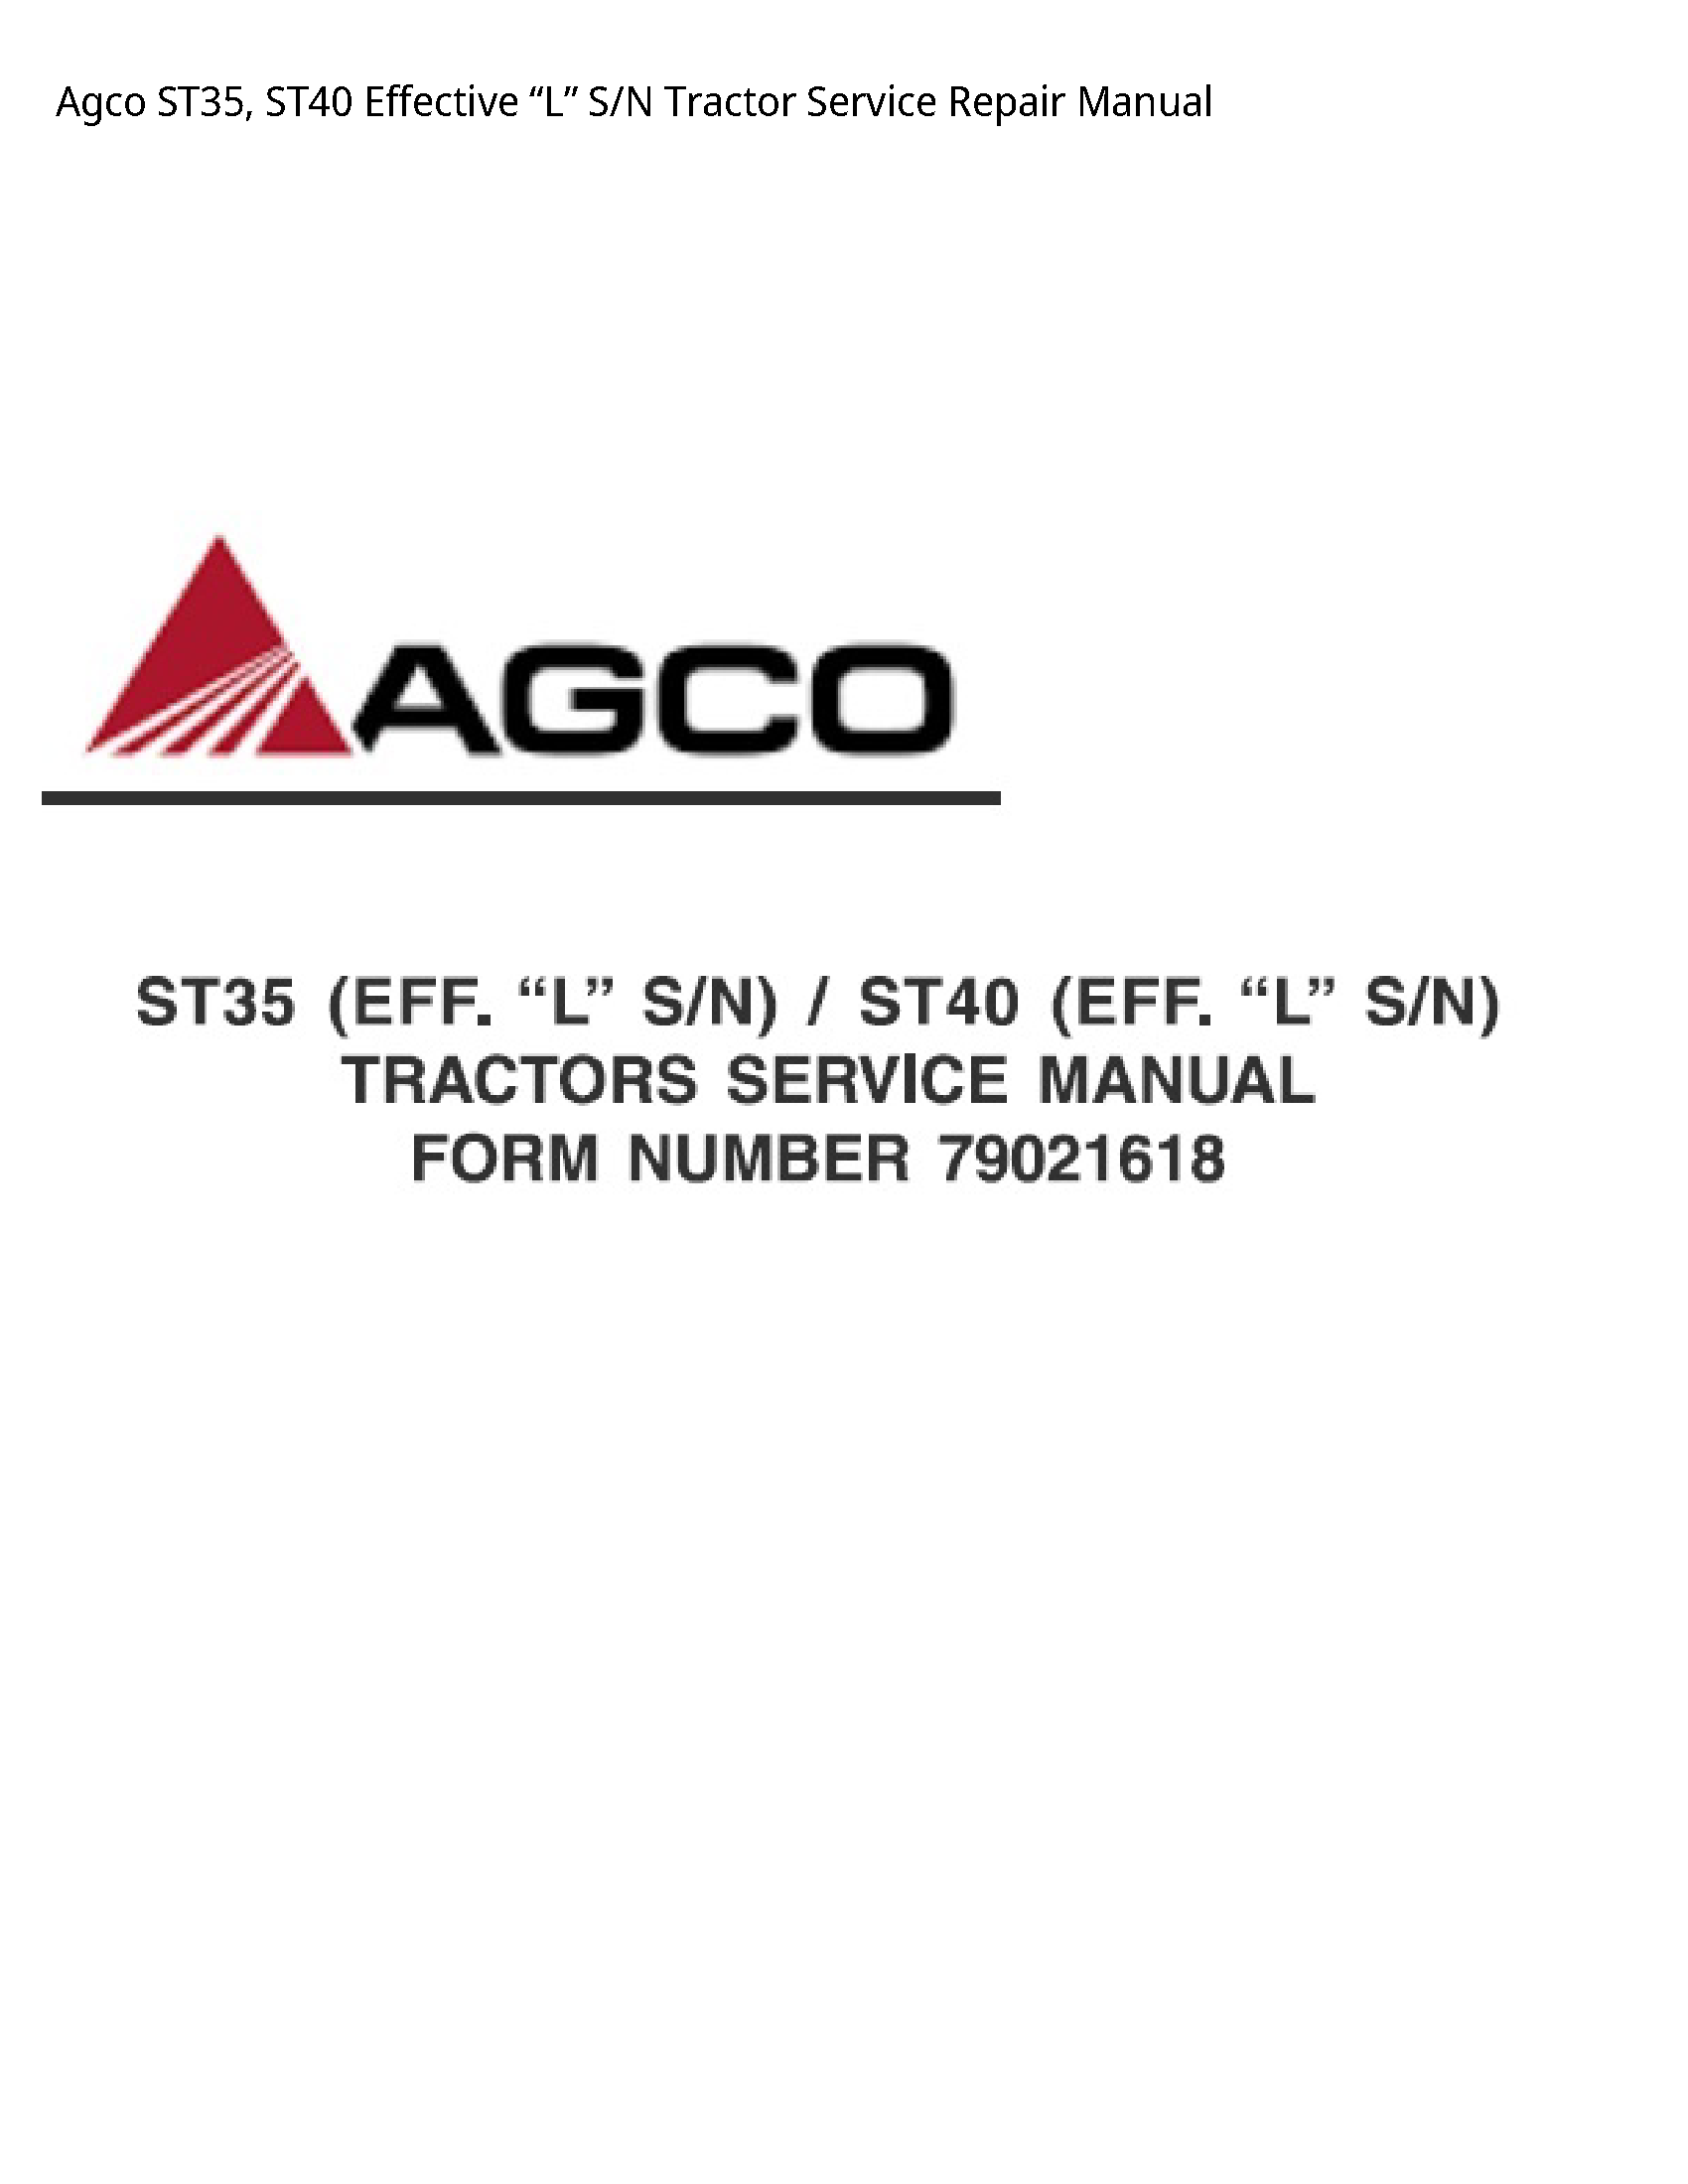 AGCO ST35 Effective “L” S/N Tractor manual